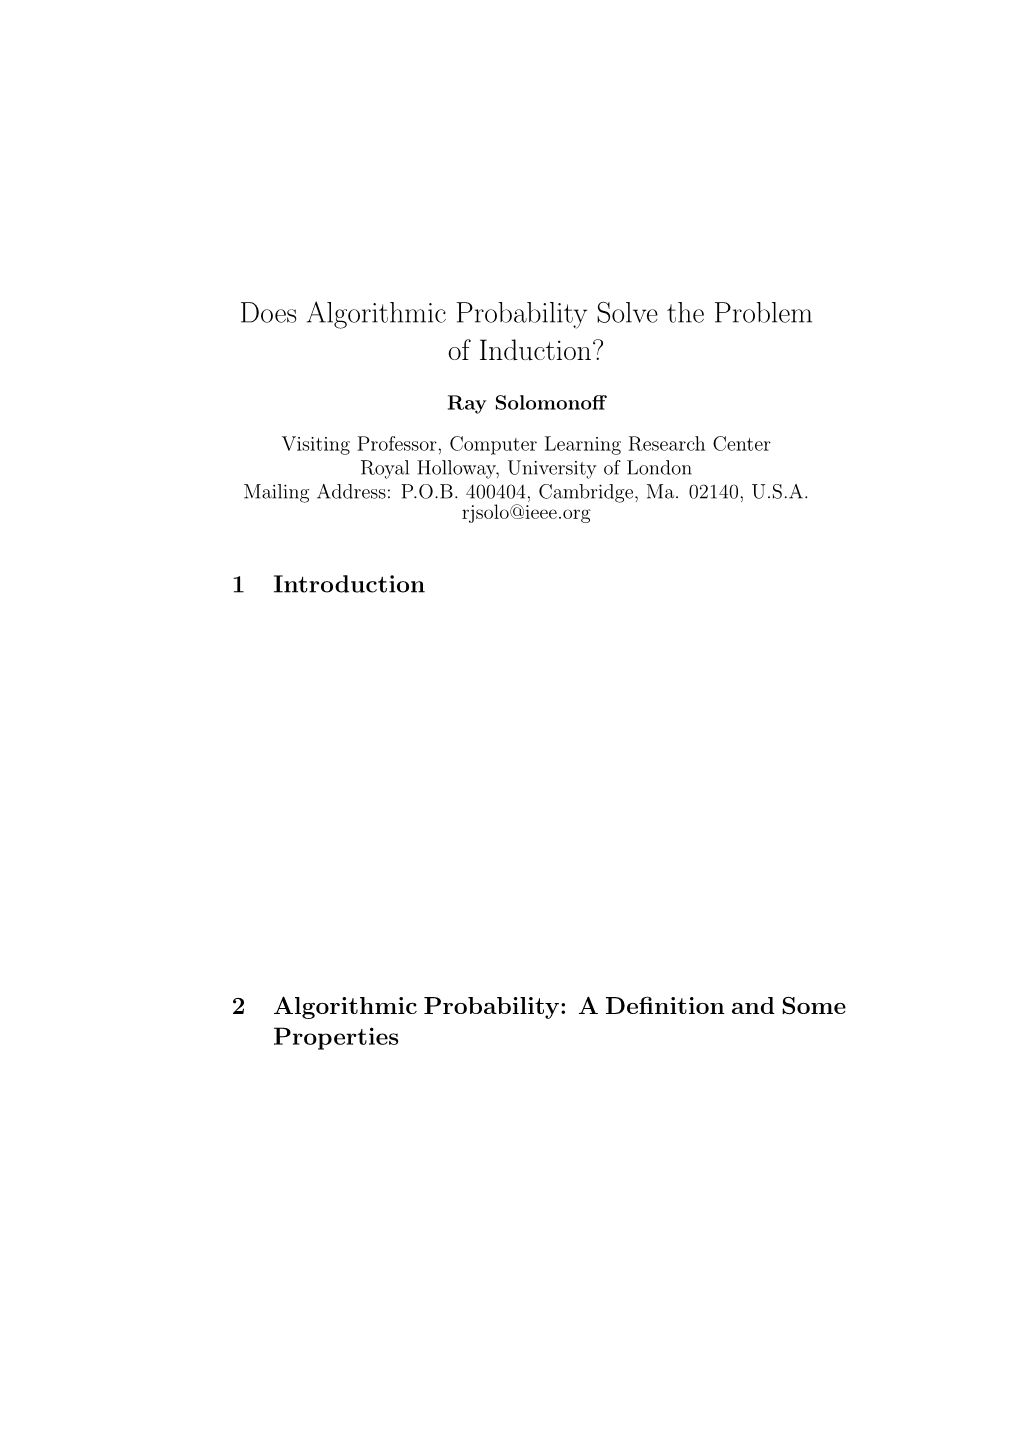 Does Algorithmic Probability Solve the Problem of Induction?